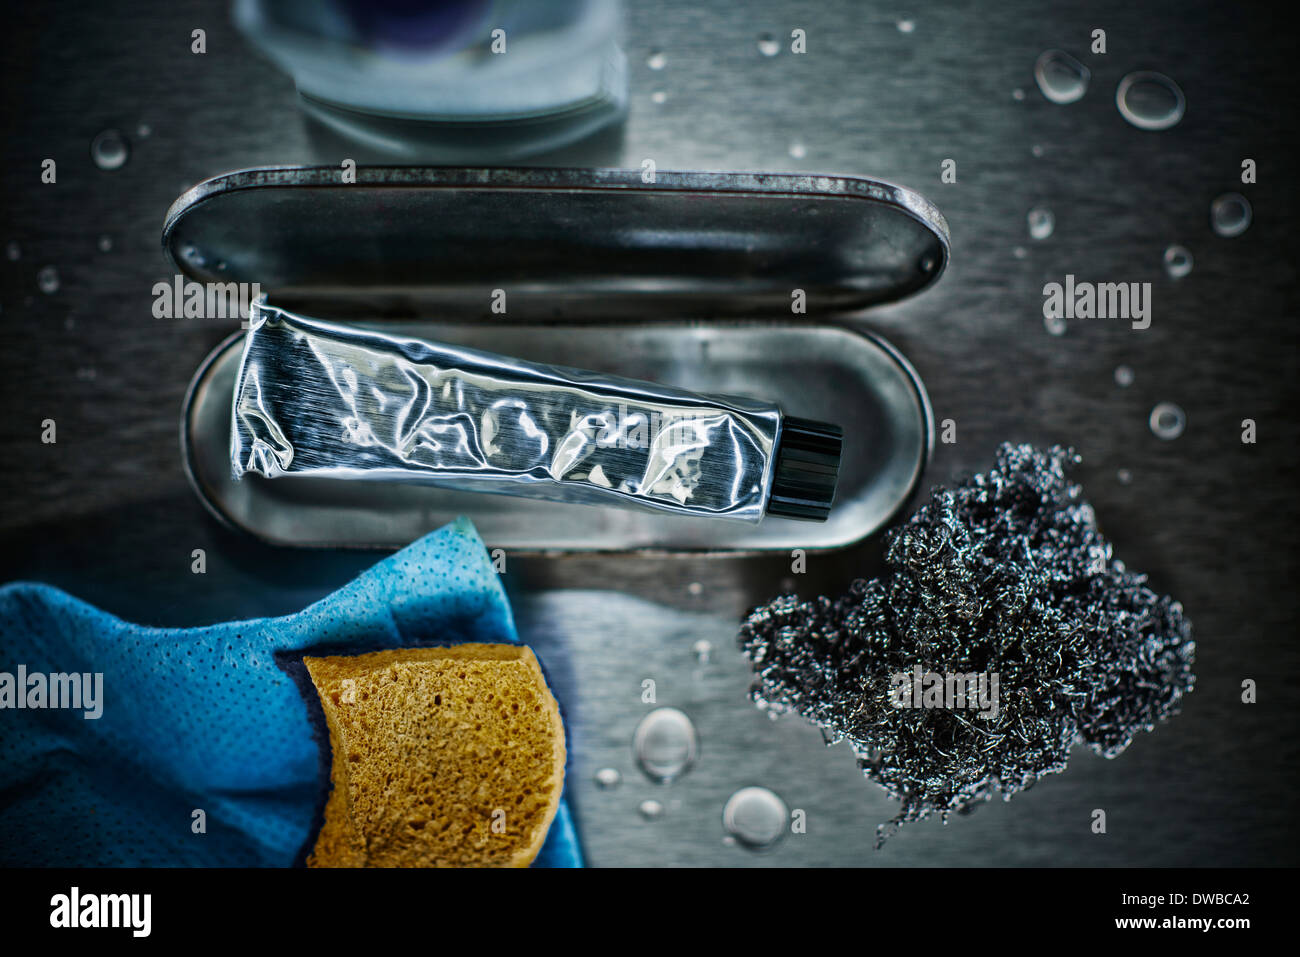 Cleaning paste, steel wool, stainless steel cleaner and sponges Stock Photo